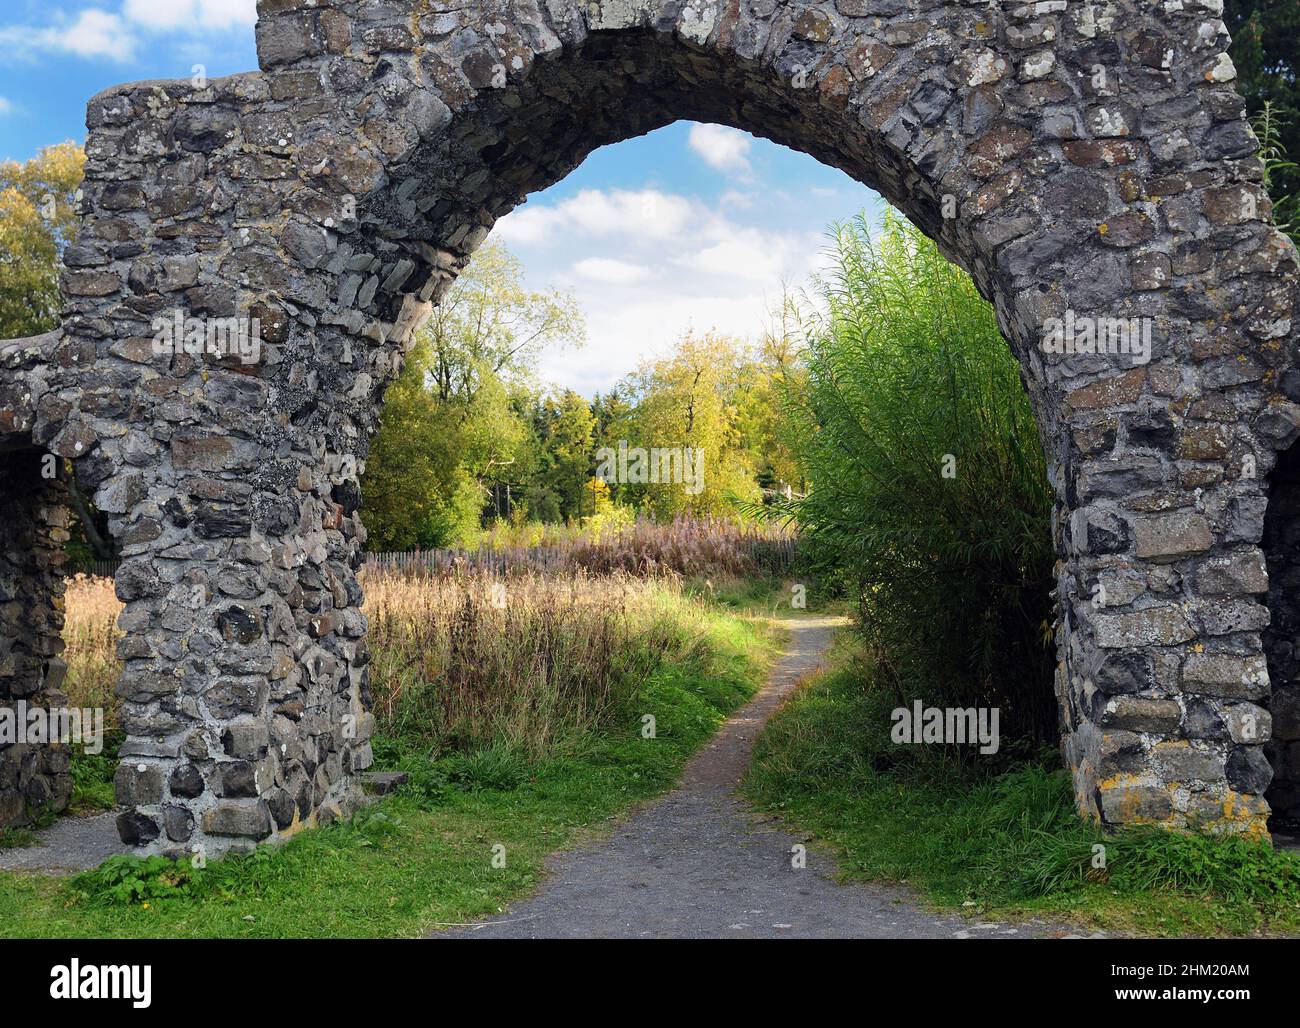 Stone Arch At The Entry Of The Black Moor In The Rhoen Mountains Germany On A Beautiful Sunny Autumn Day With A Clear Blue Sky And A Few Clouds Stock Photo